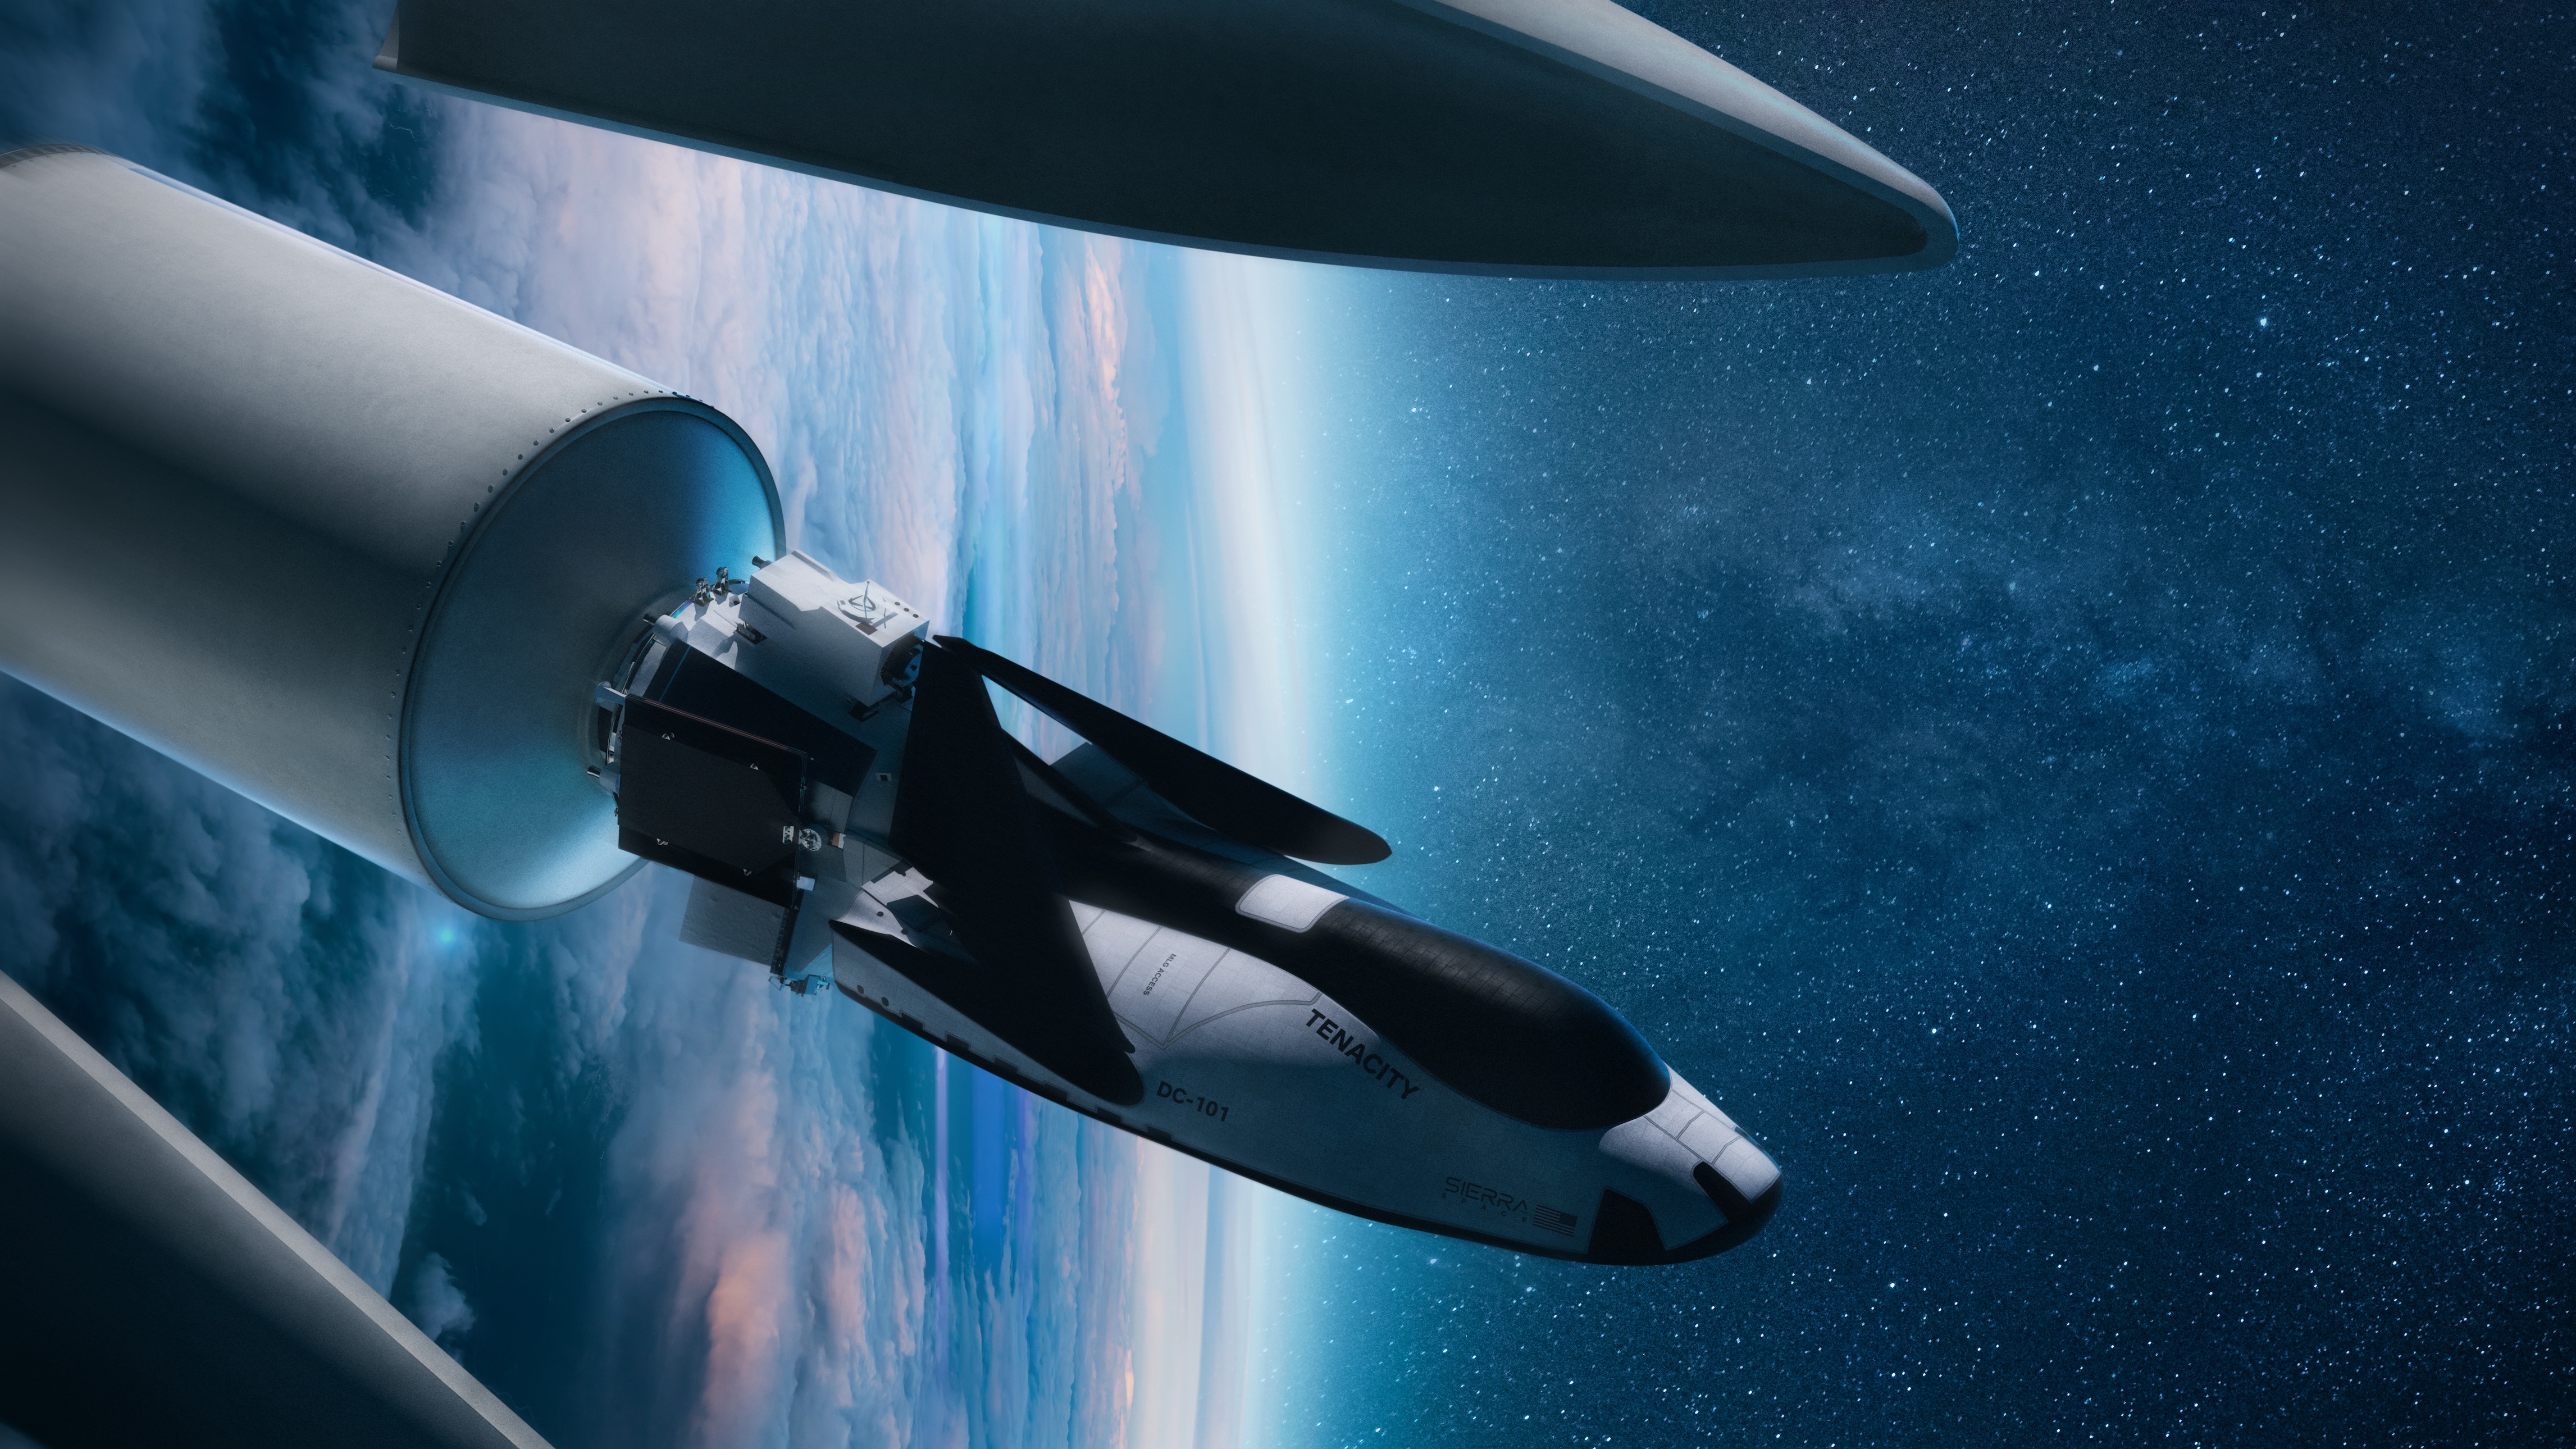 Rendering of the Dream Chaser spaceplane in low Earth orbit